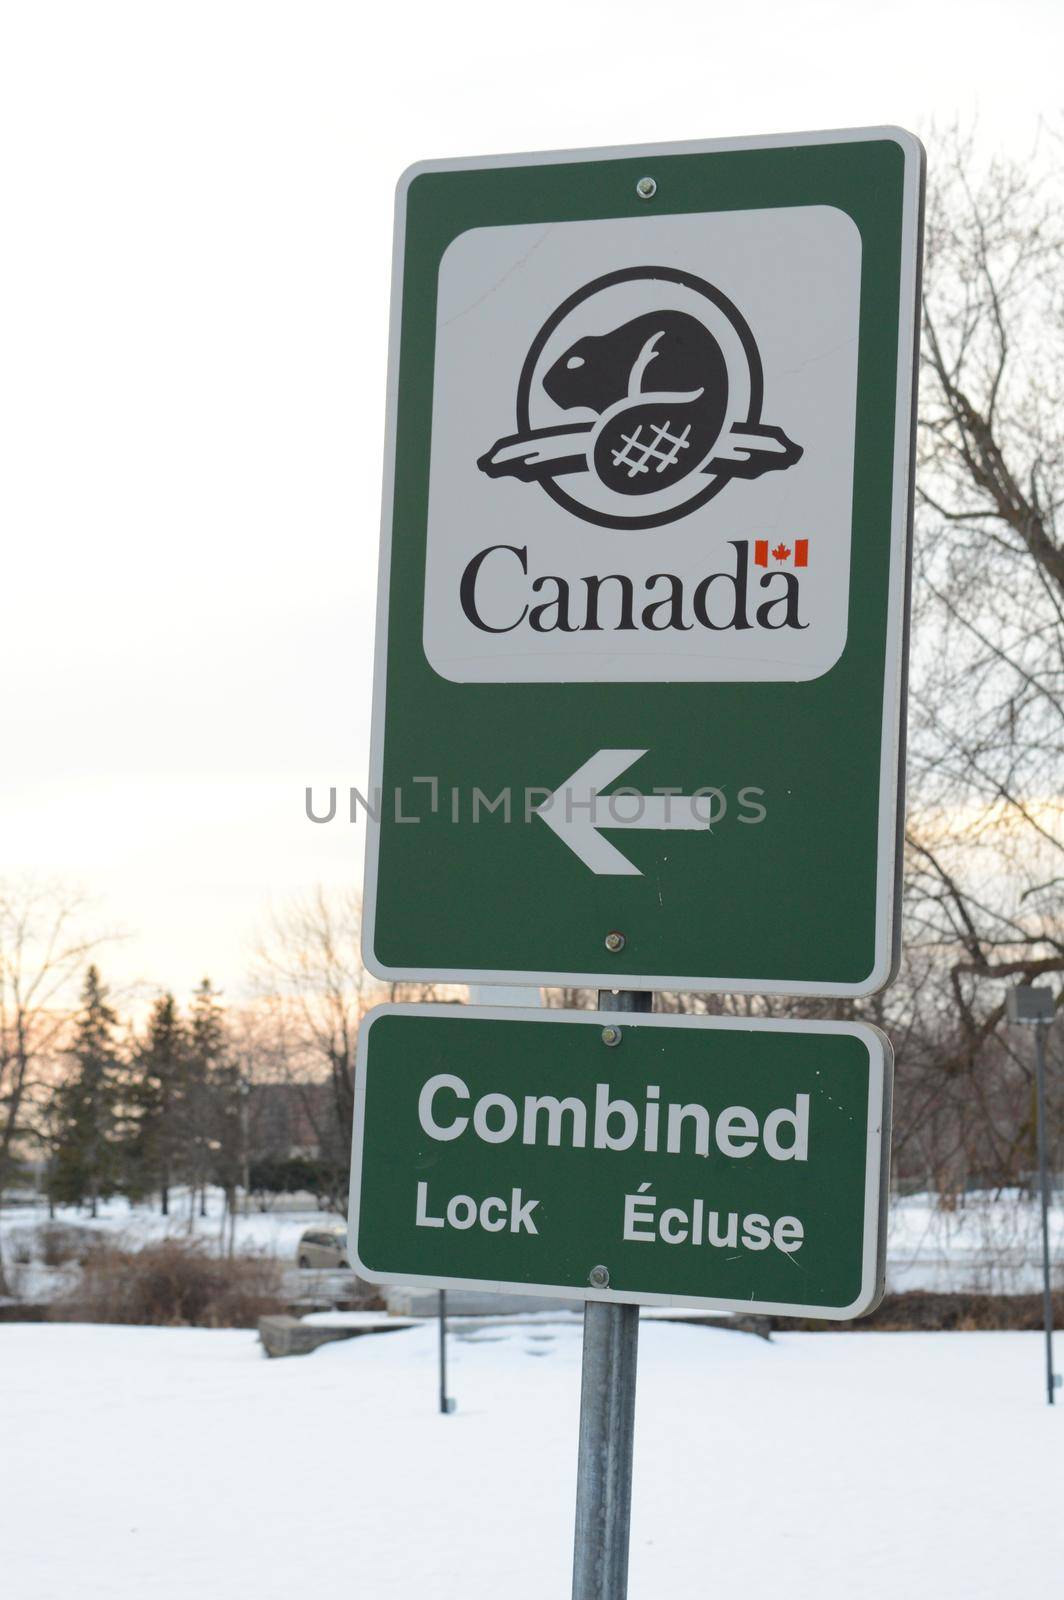 SMITHS FALLS, ONTARIO, CANADA, MARCH 10, 2021: A government of Canada signage for the combined lock ahead located at the heart of the Rideau Canal in Smiths Falls, Ontario.